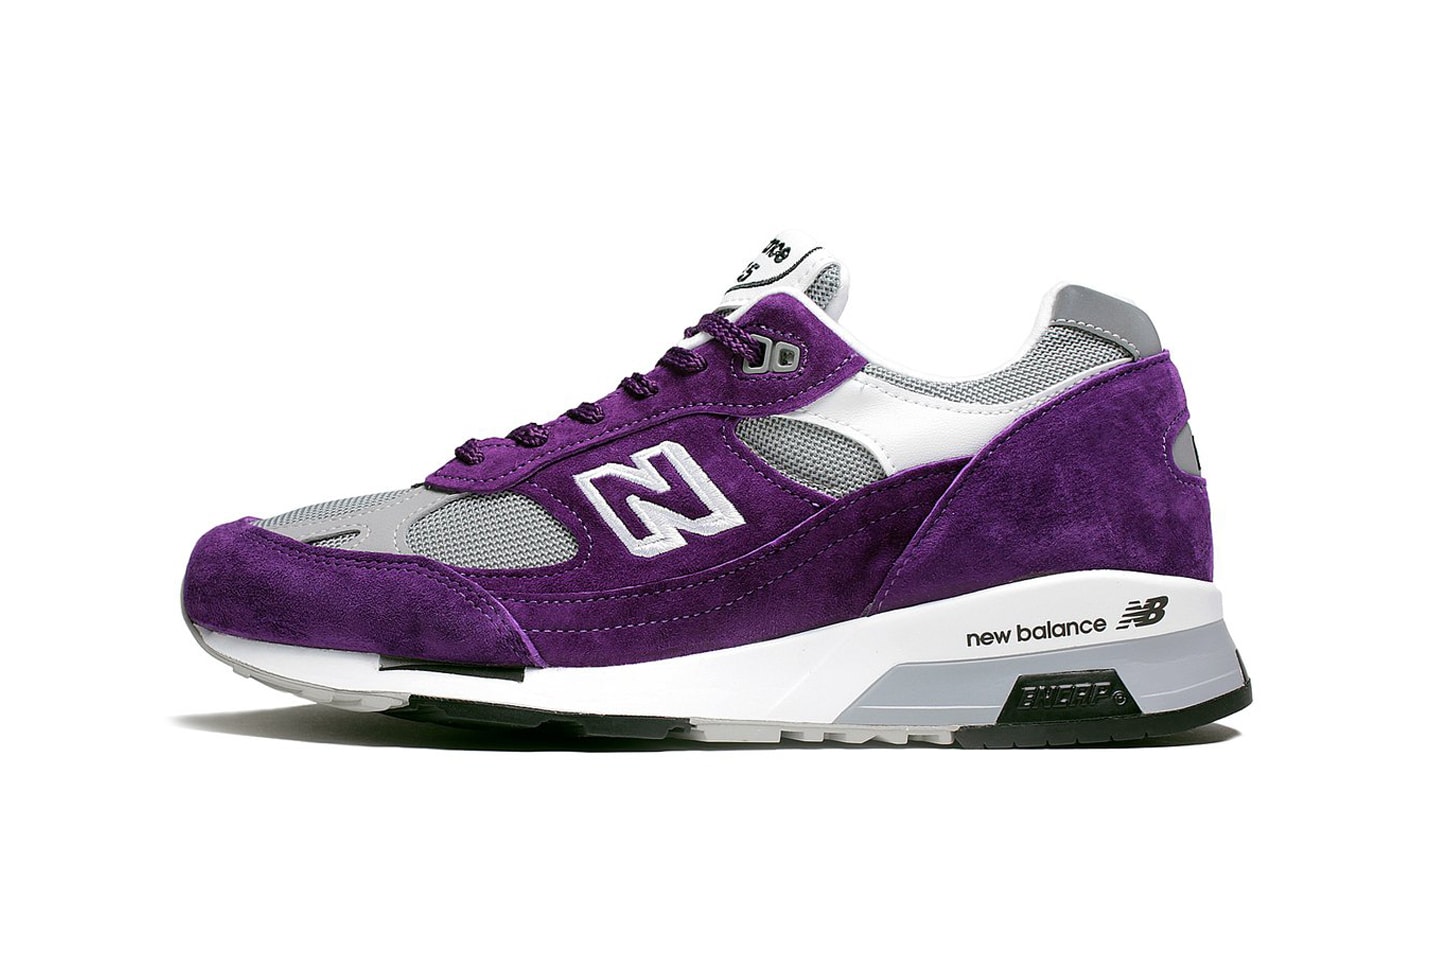 New Balance 991.5 "Made in England" Collection Shoes Kicks Trainers Sneakers Spring Colorways Red Purple Black To Buy Purchase Sale information